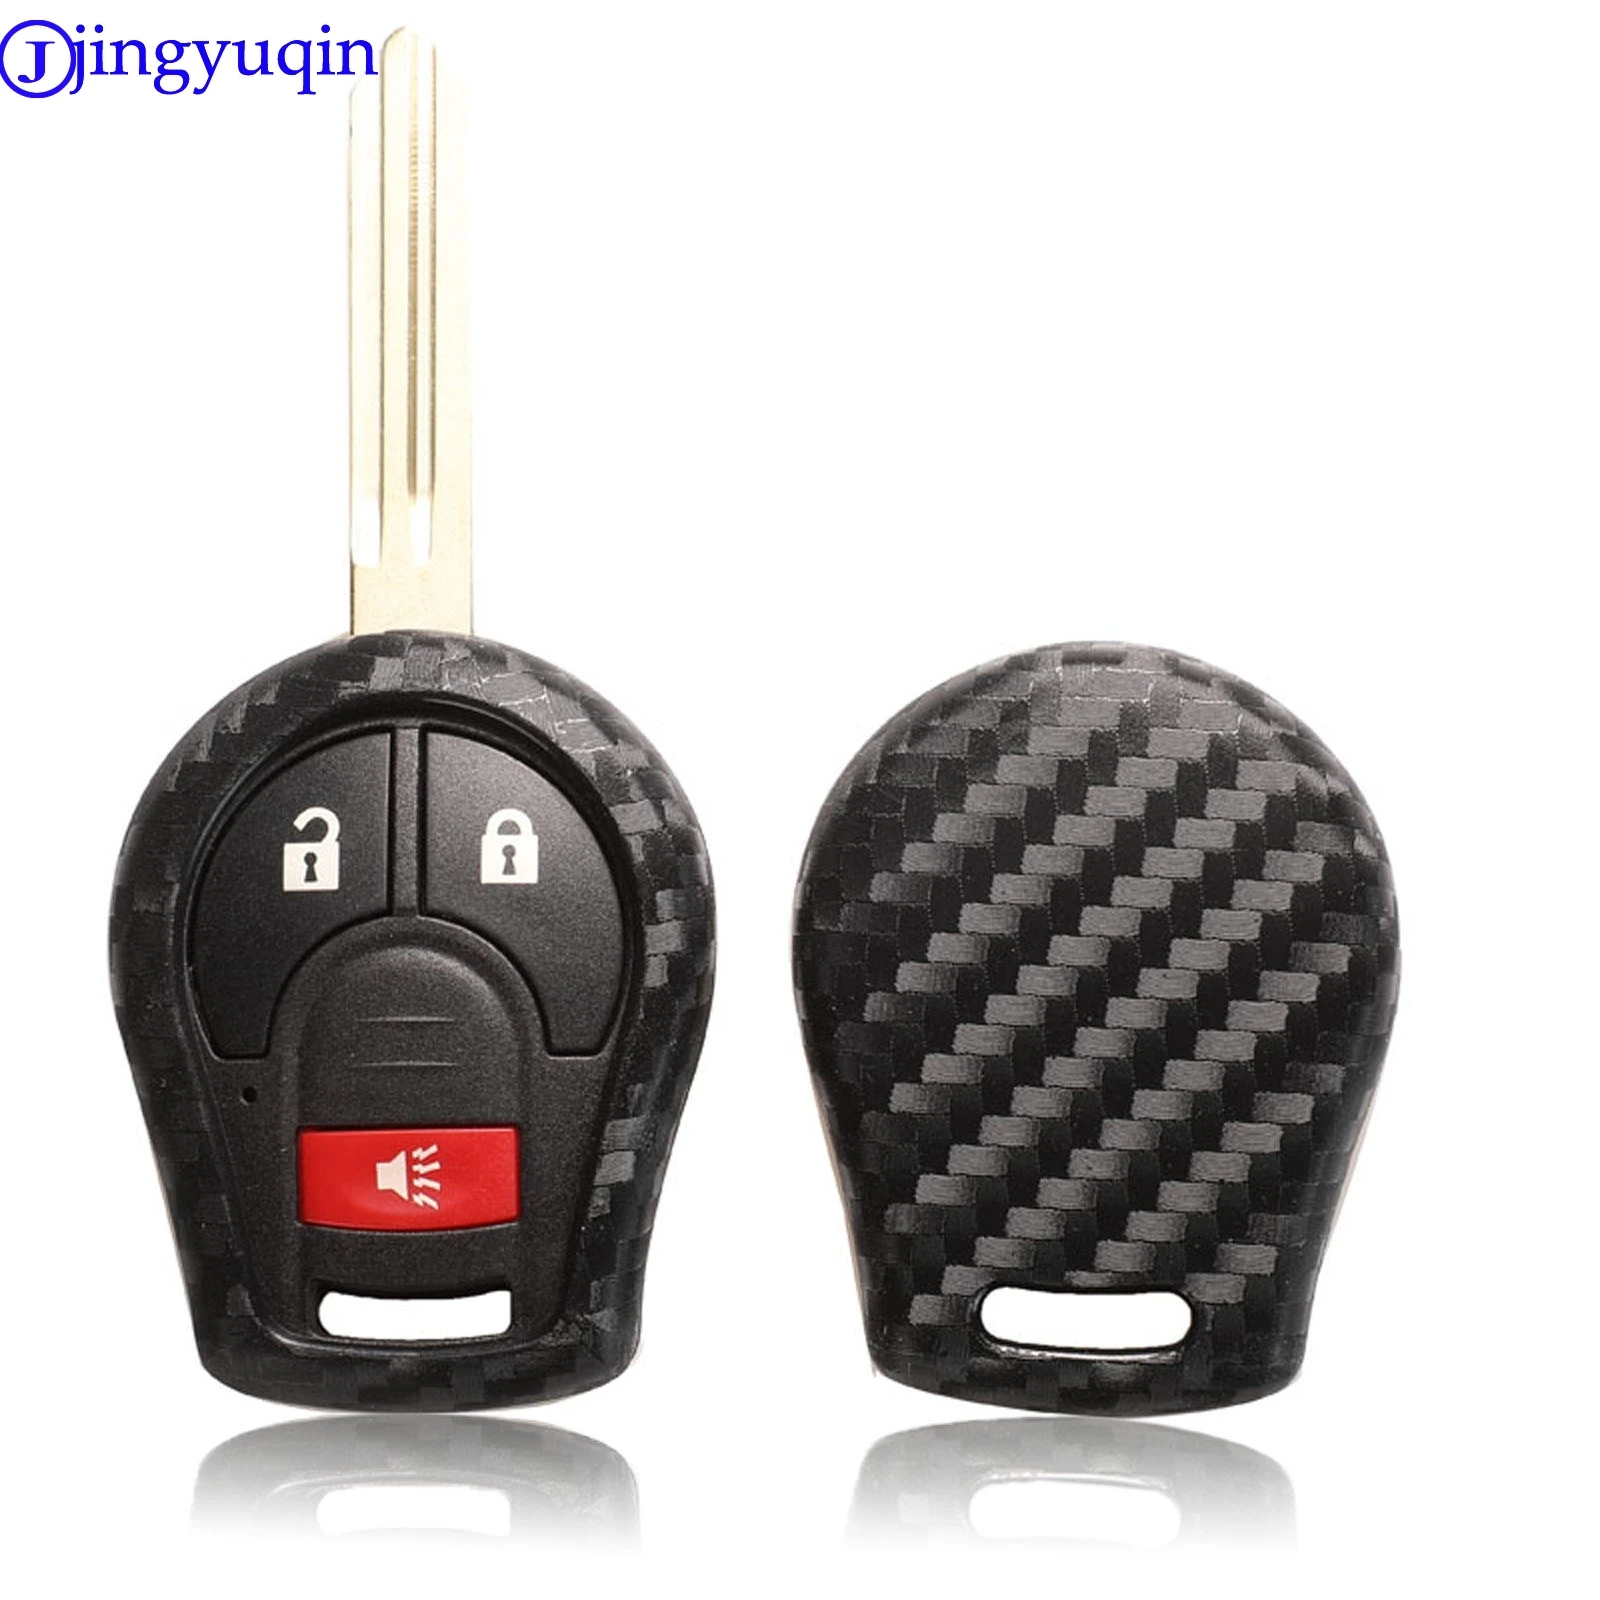 

jingyuqin 2/3/4 Buttons Car Key Case Cover For Nissan Juke March Qashqai Sunny Sylphy Tiida X-Trail Carbon Silicone